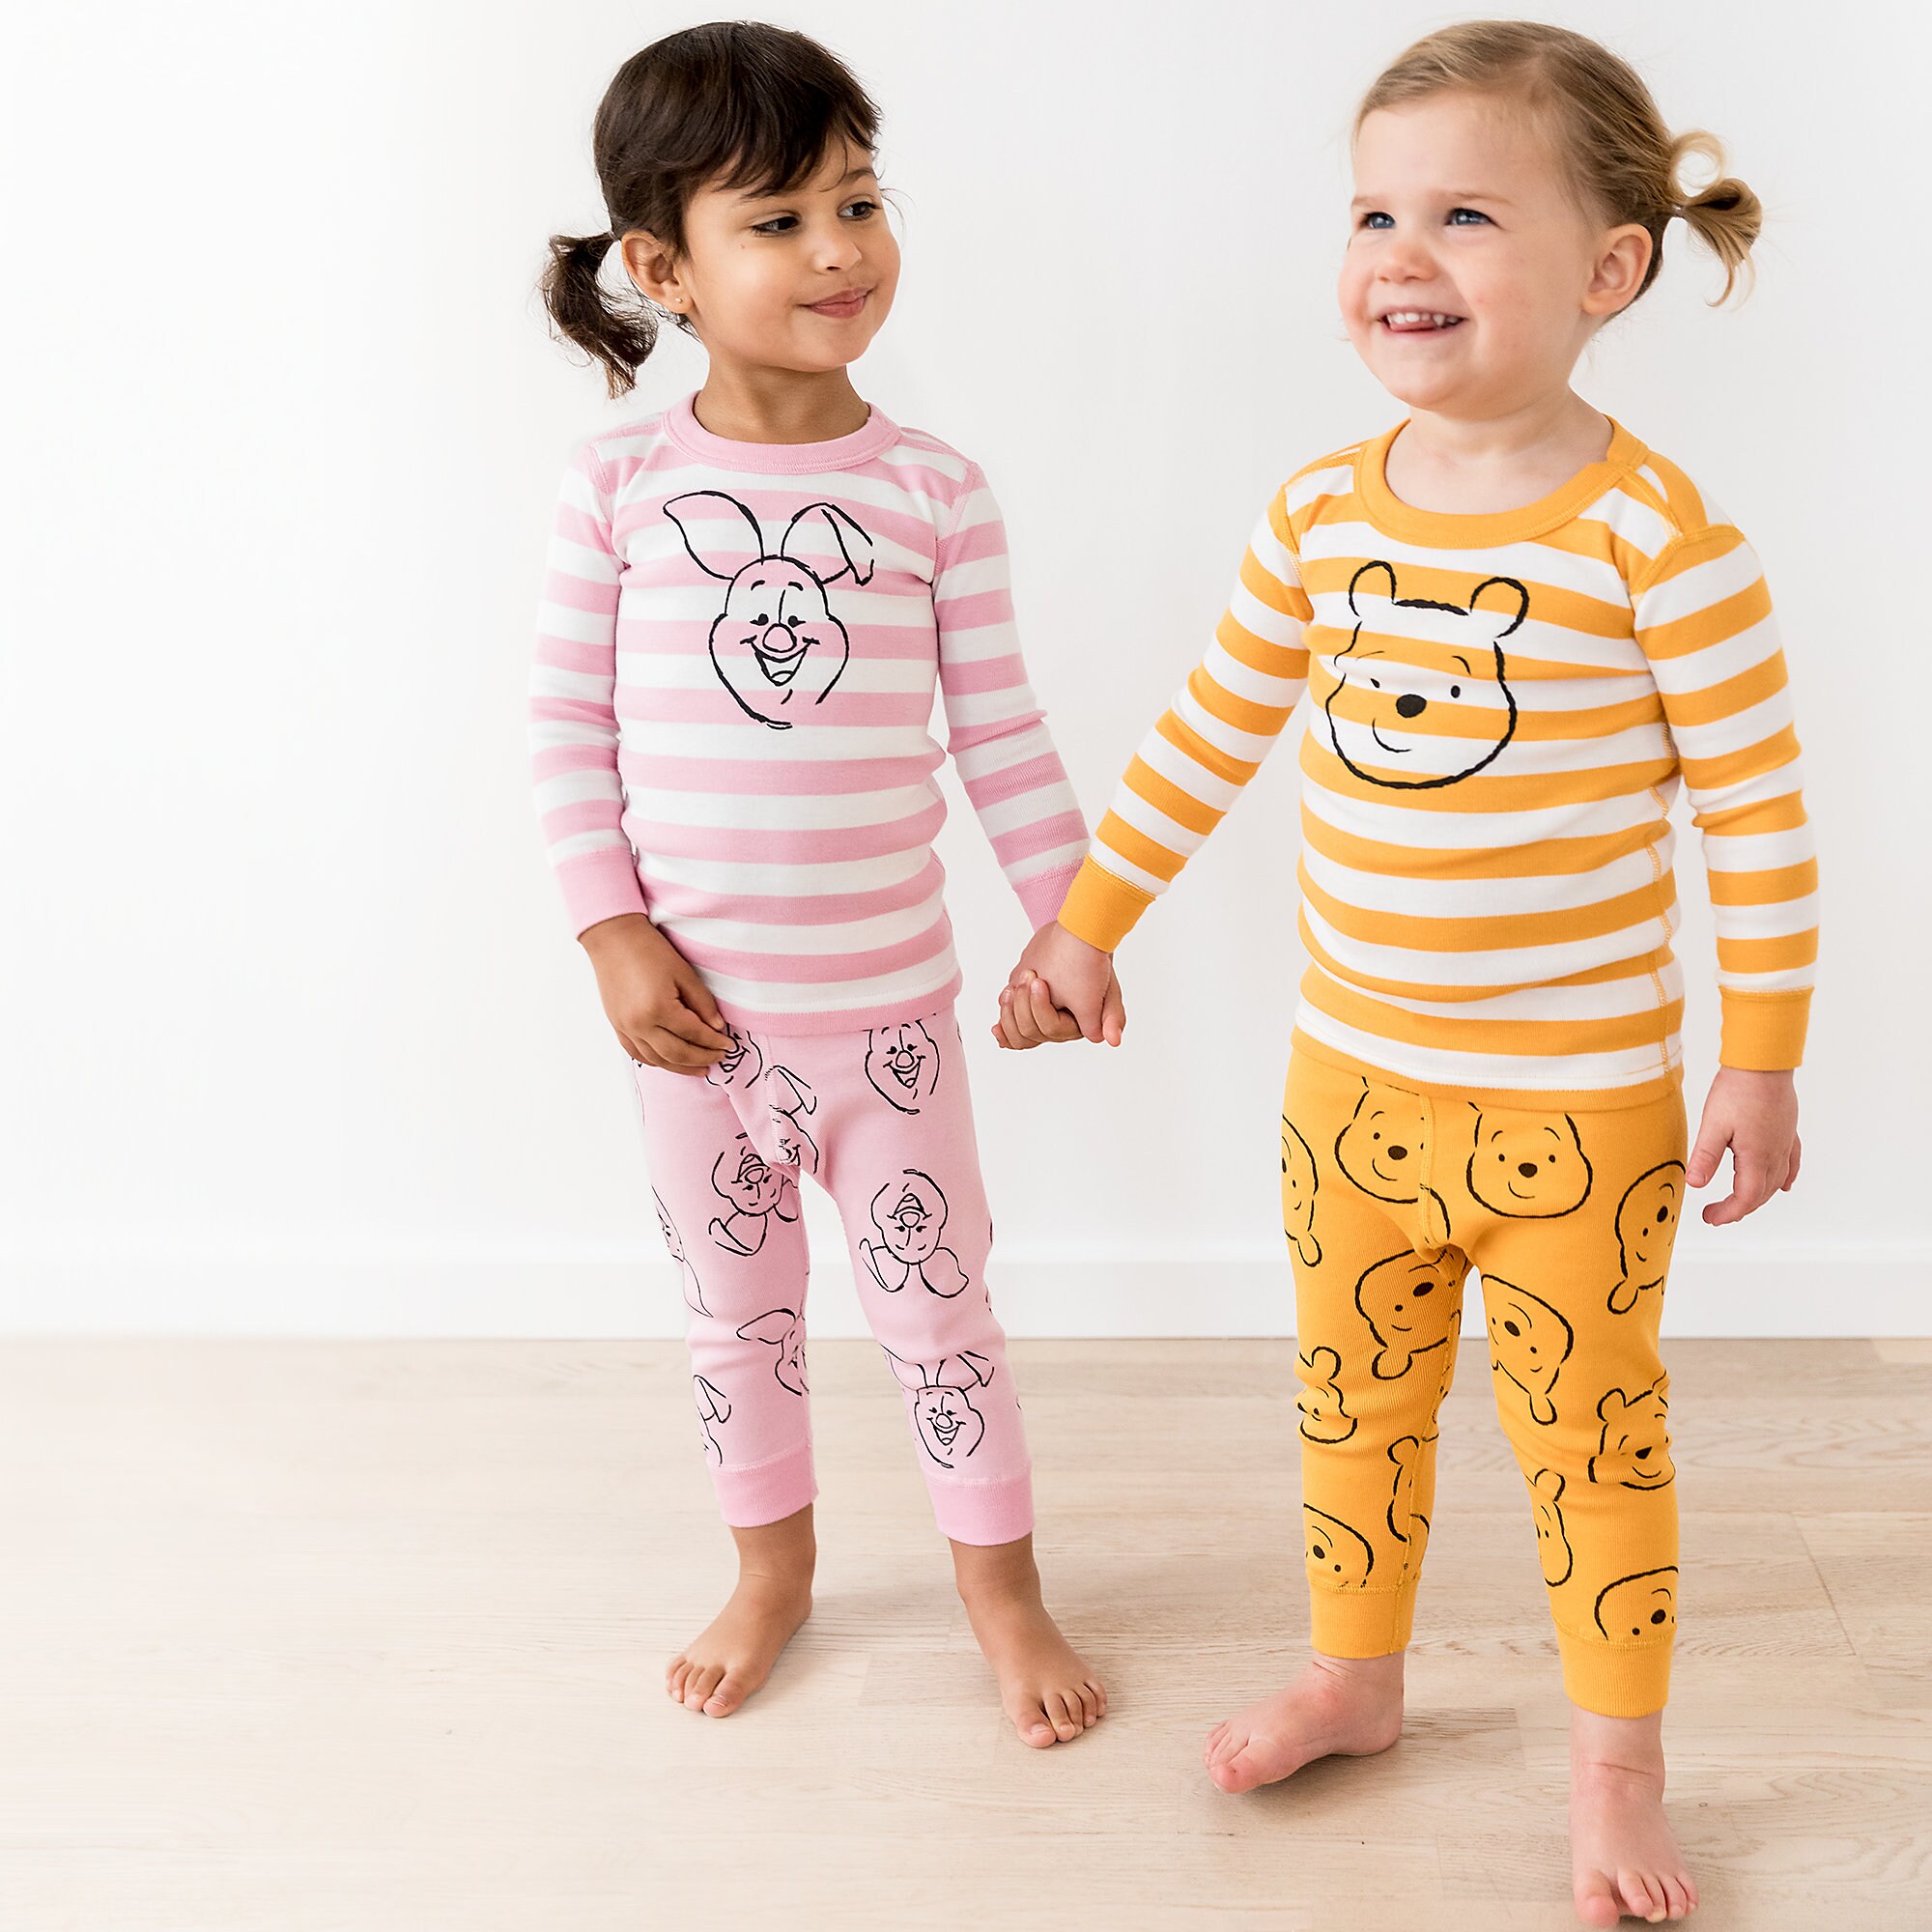 Piglet Organic Long John Pajama Set for Baby by Hanna Andersson